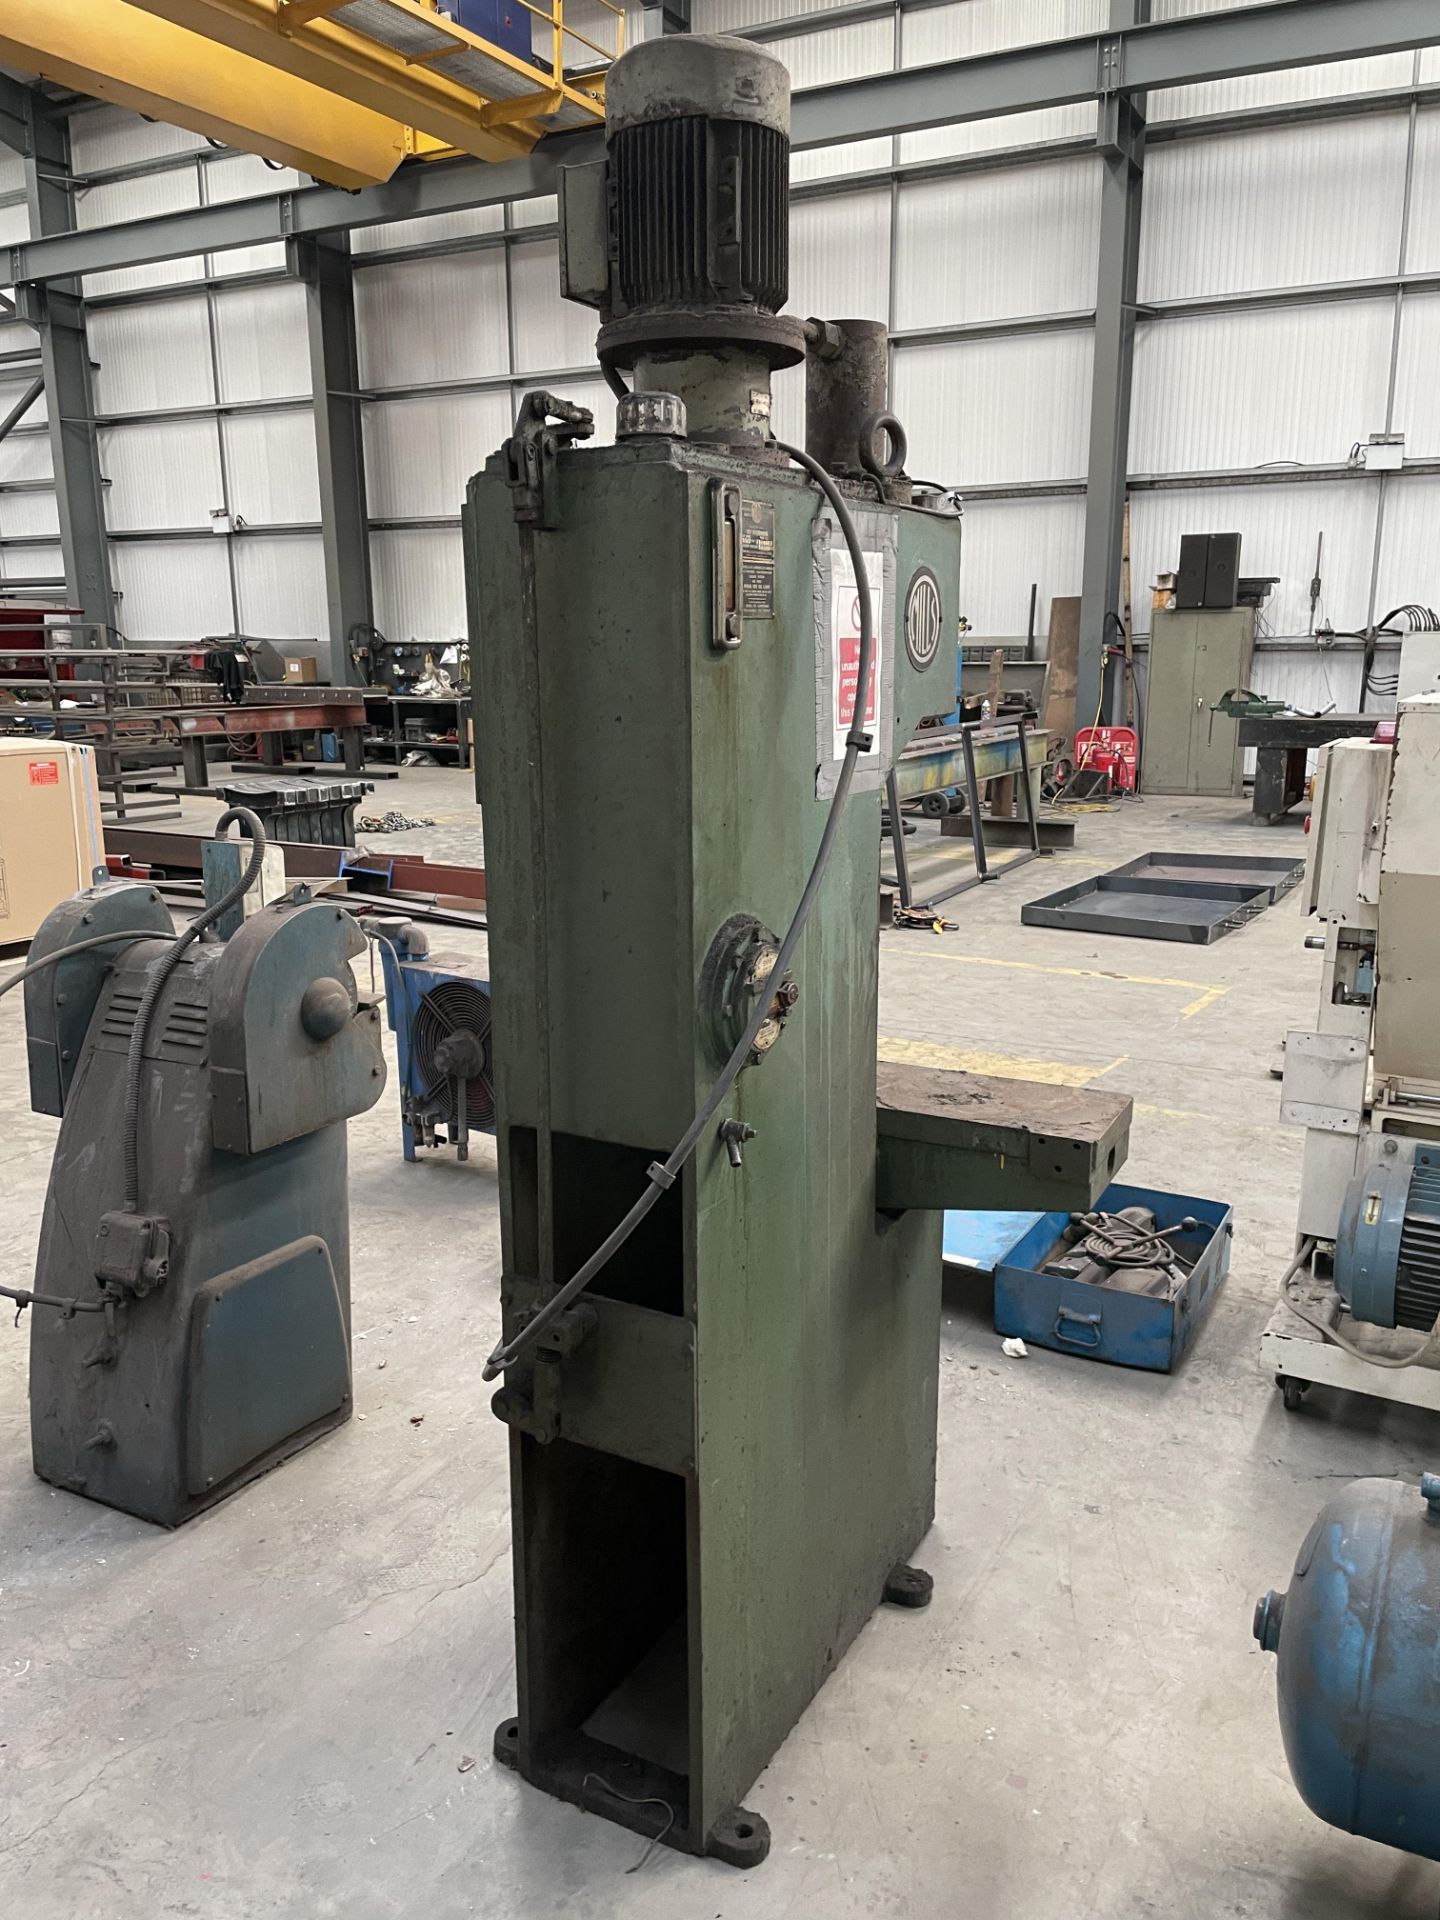 Mills Hydraulic Press, serial no. 52071, with table approx. 910mm x 250mm, lot located at Ocean - Image 3 of 4